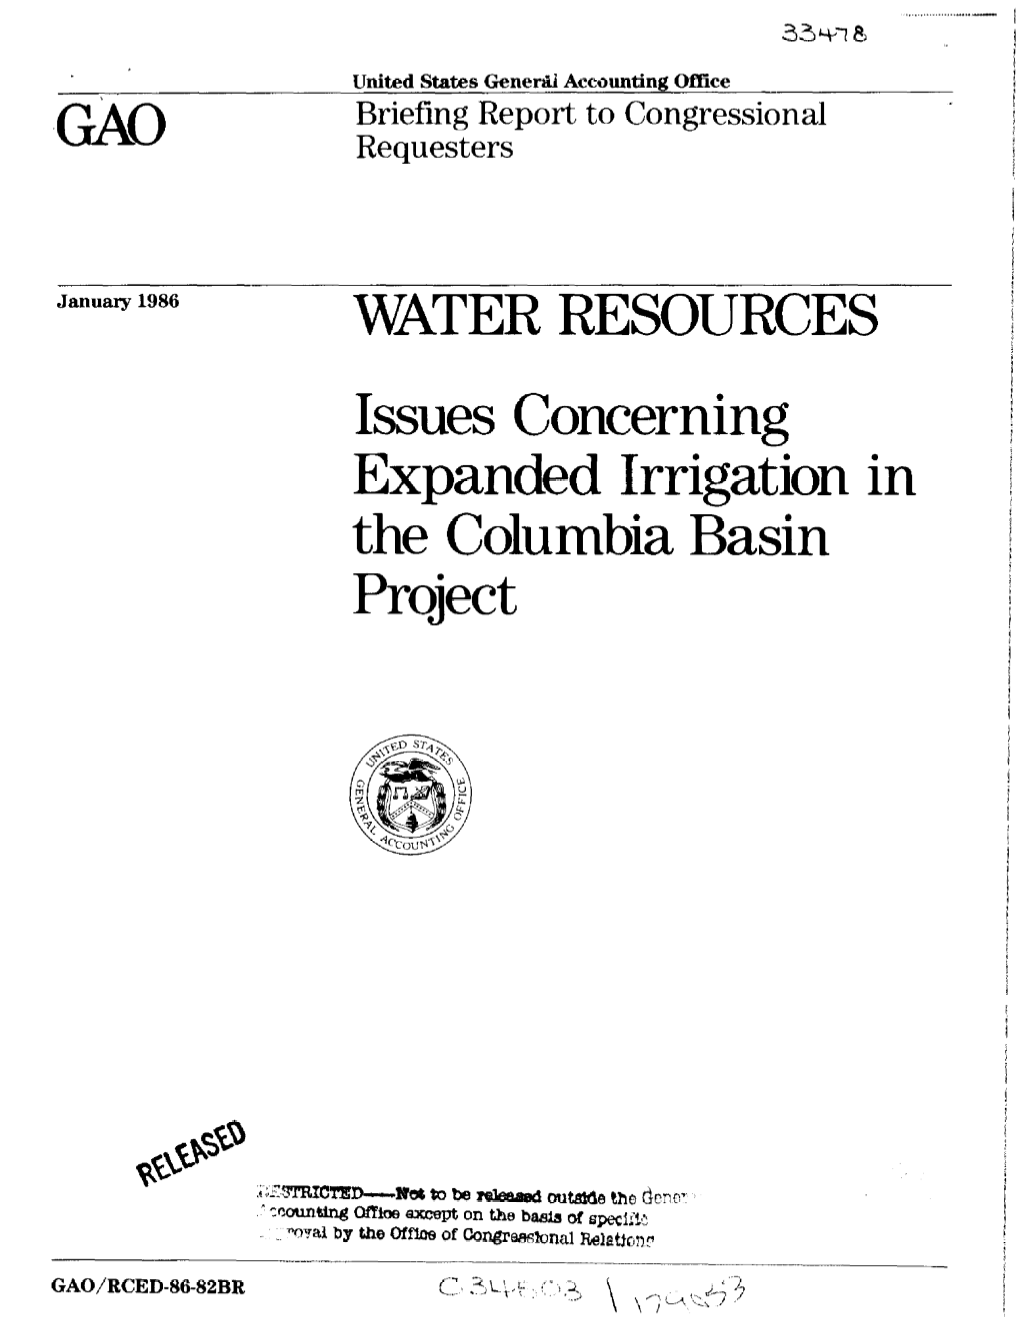 Issues Concerning Expanded Irrigation in the Columbia Basin Project